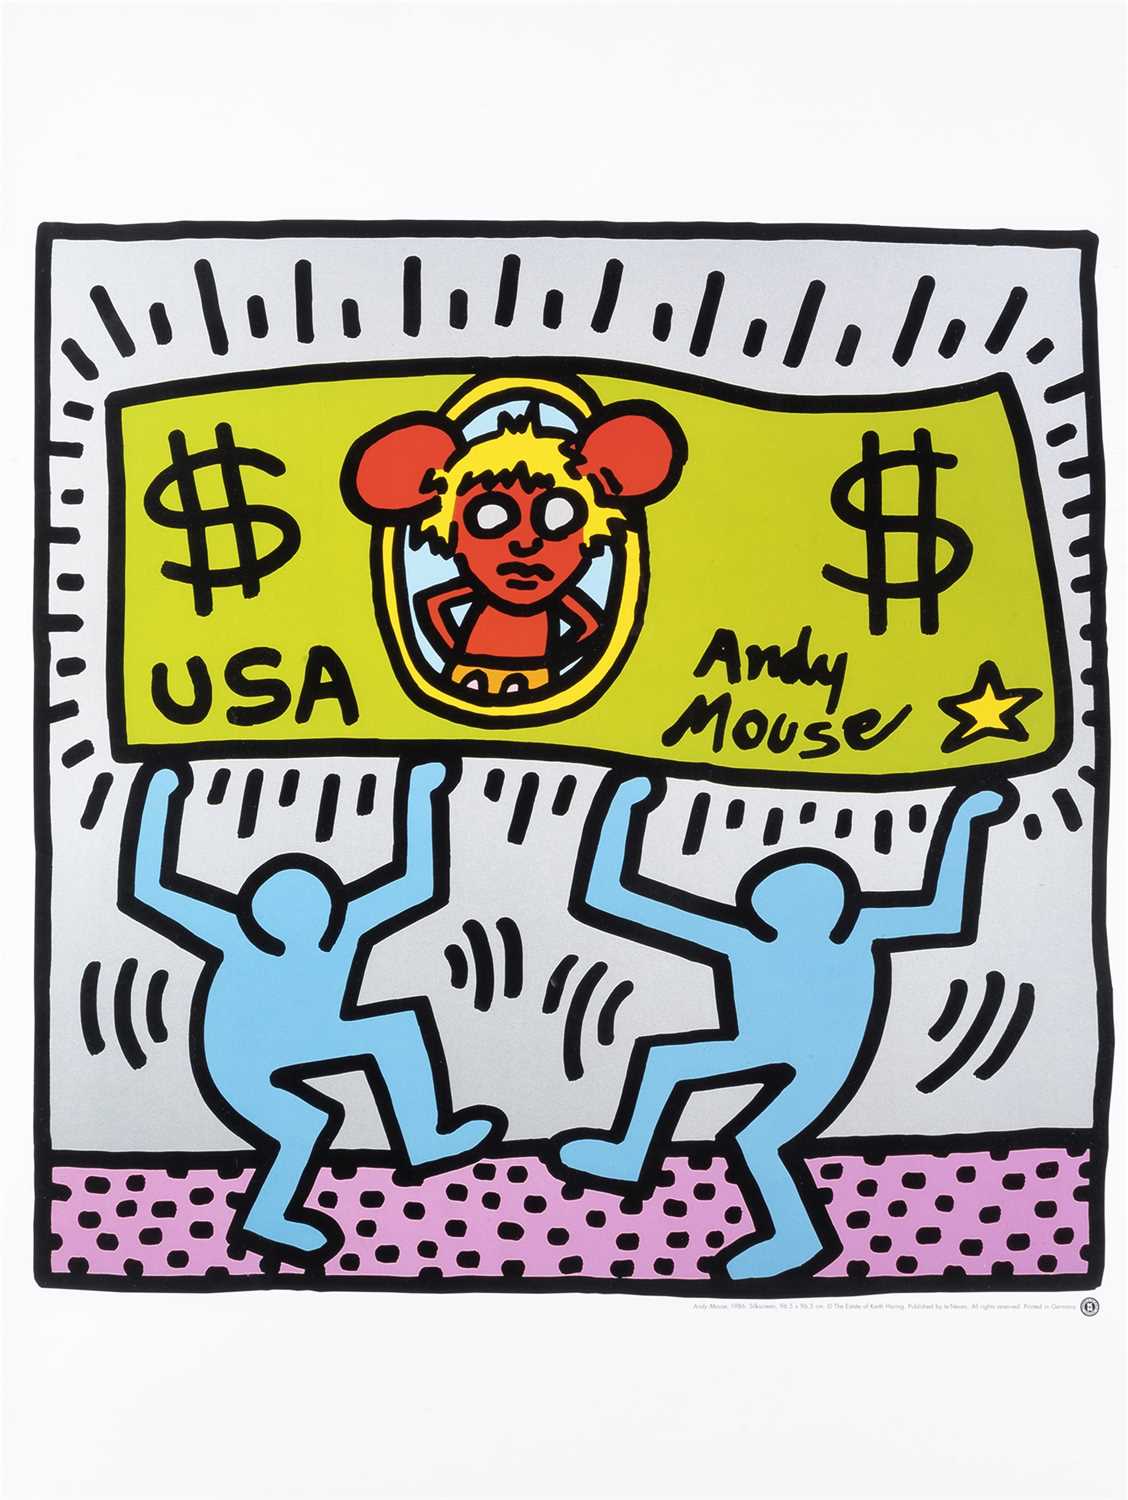 Lot 49 - Keith Haring (American 1958-1990), ‘Andy Mouse’, 1986